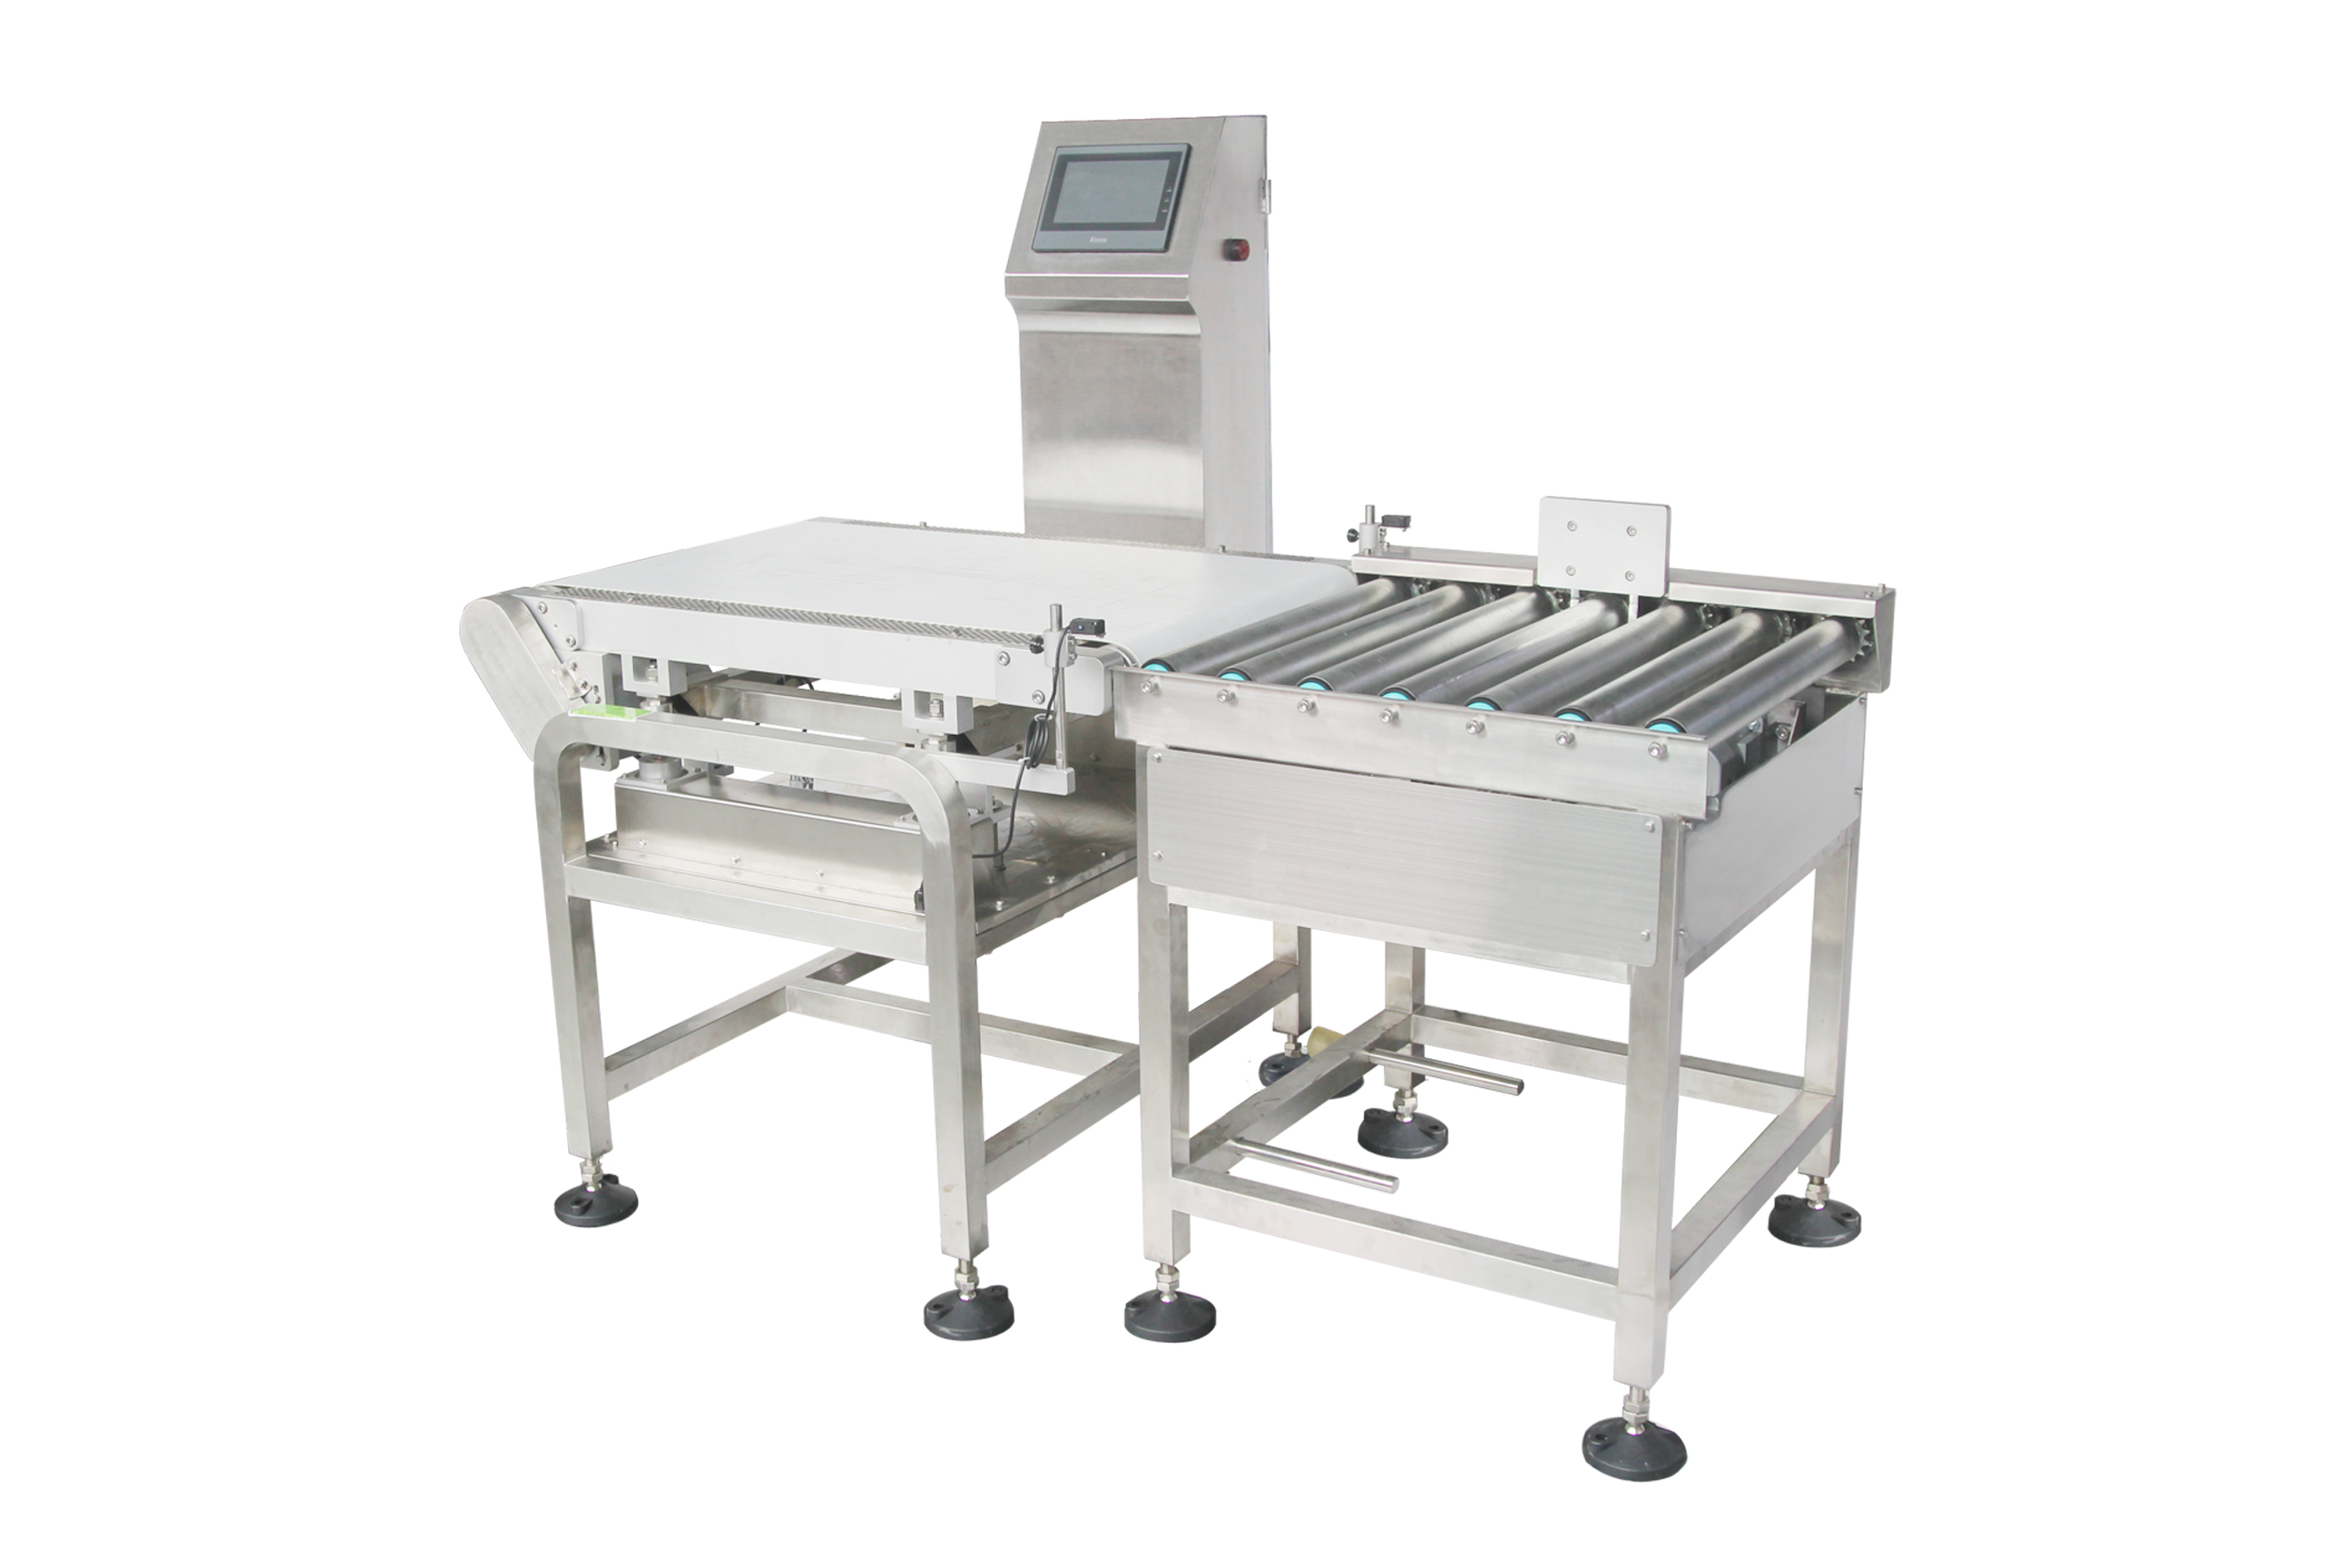 Large Weighing Range Belt Conveyor Check Weigher Machine High Accuracy Automatic 30kg 7